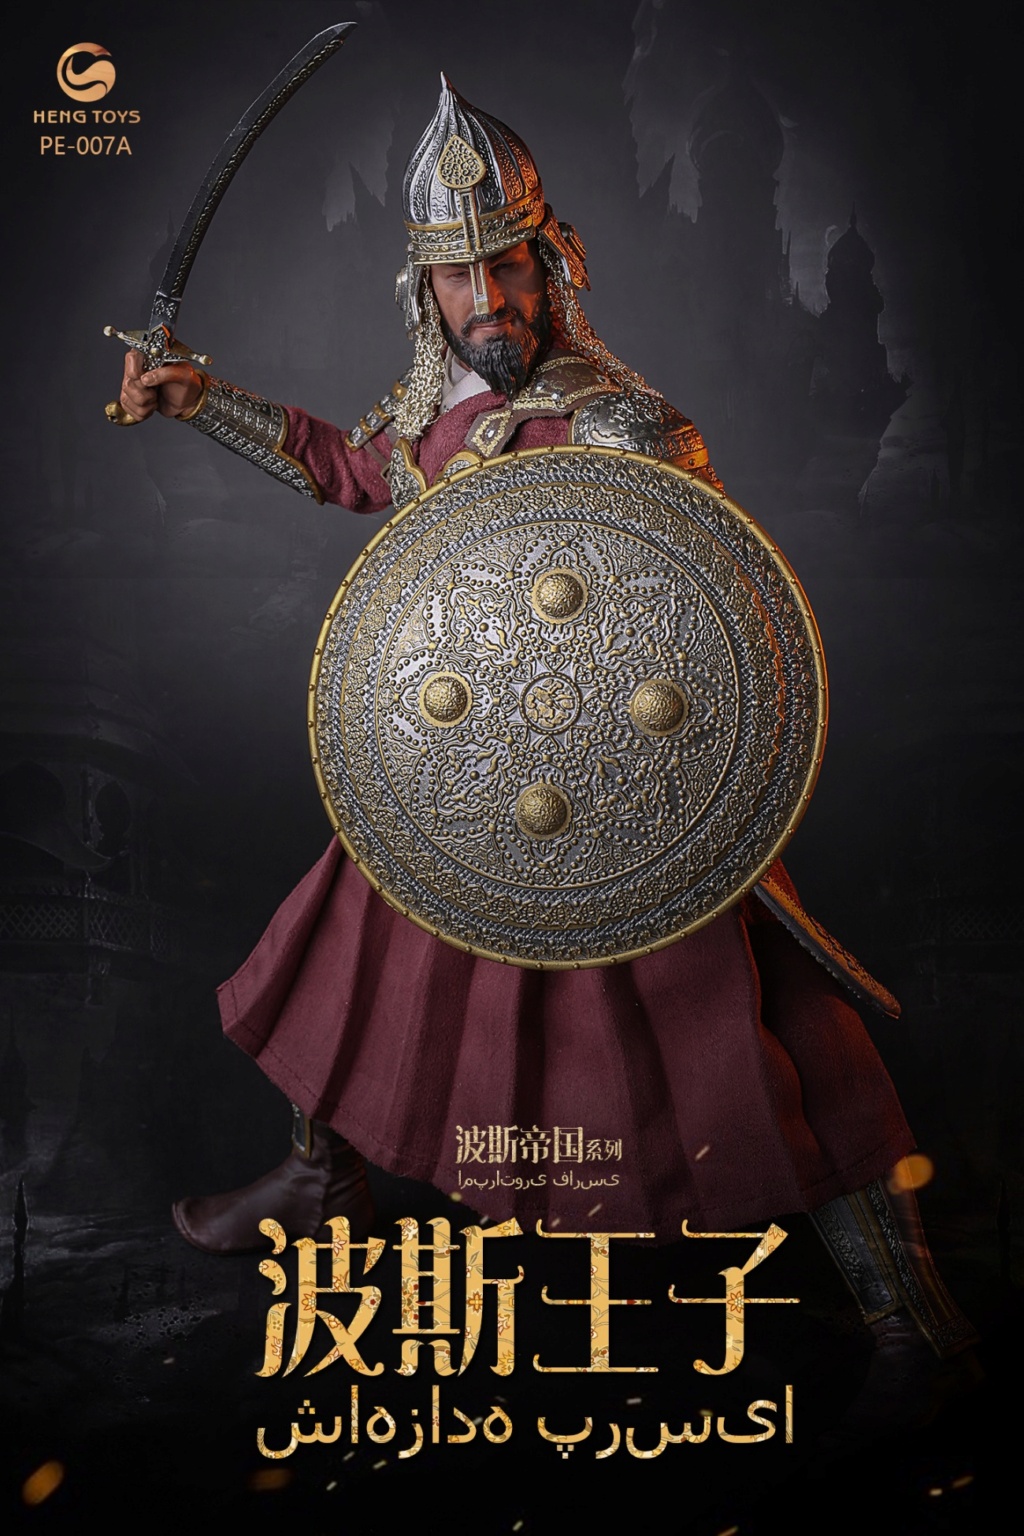 HengToys - NEW PRODUCT: HengToys: 1/6 Persian Empire Series-Prince of Persia [A & B Section] (#PE-007) 16032811